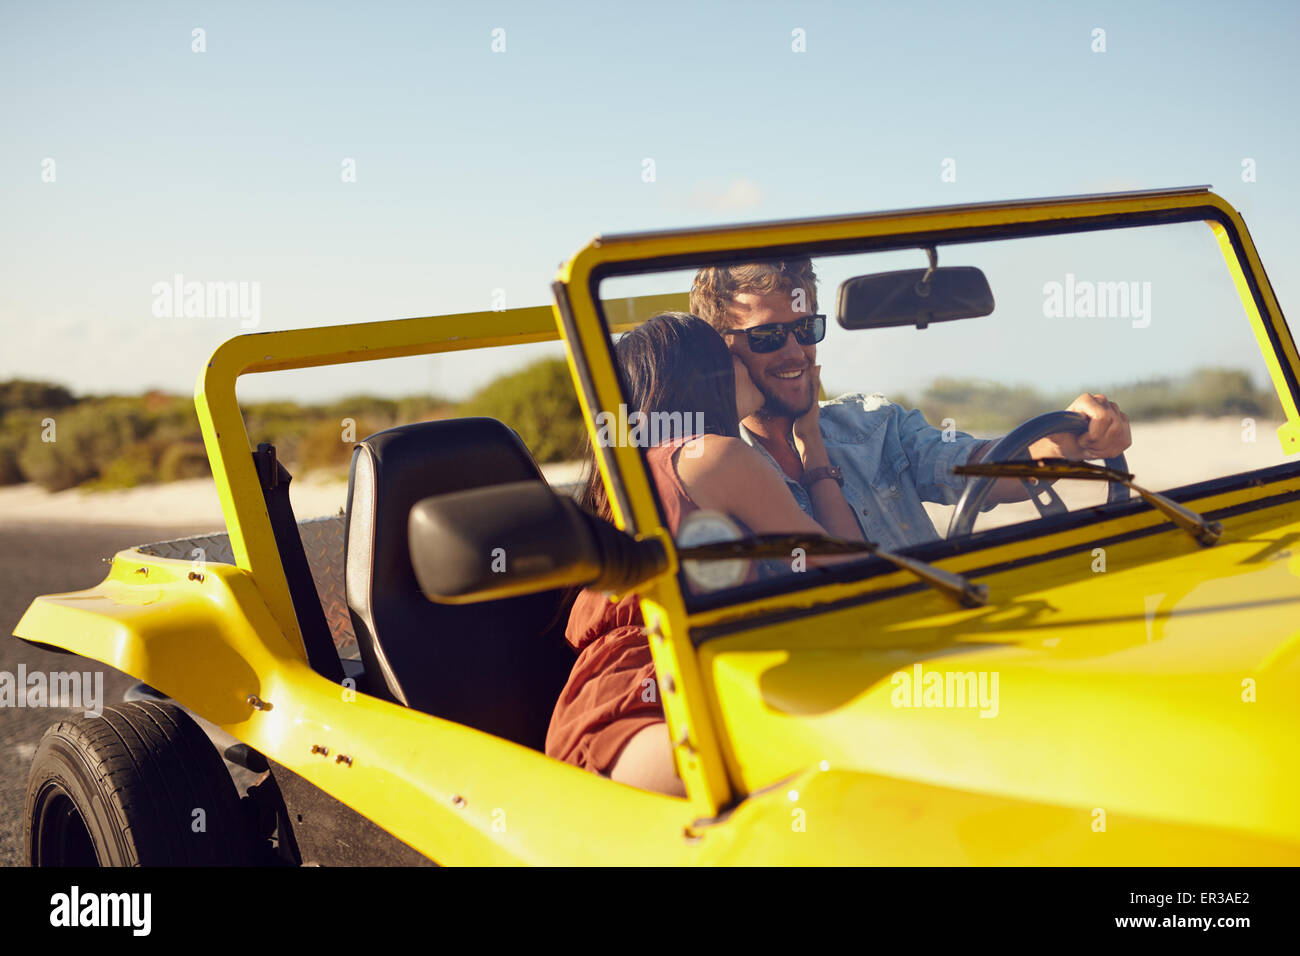 Woman kissing man driving car. Couple on road trip. Romantic caucasian couple on holiday having fun in car. Stock Photo